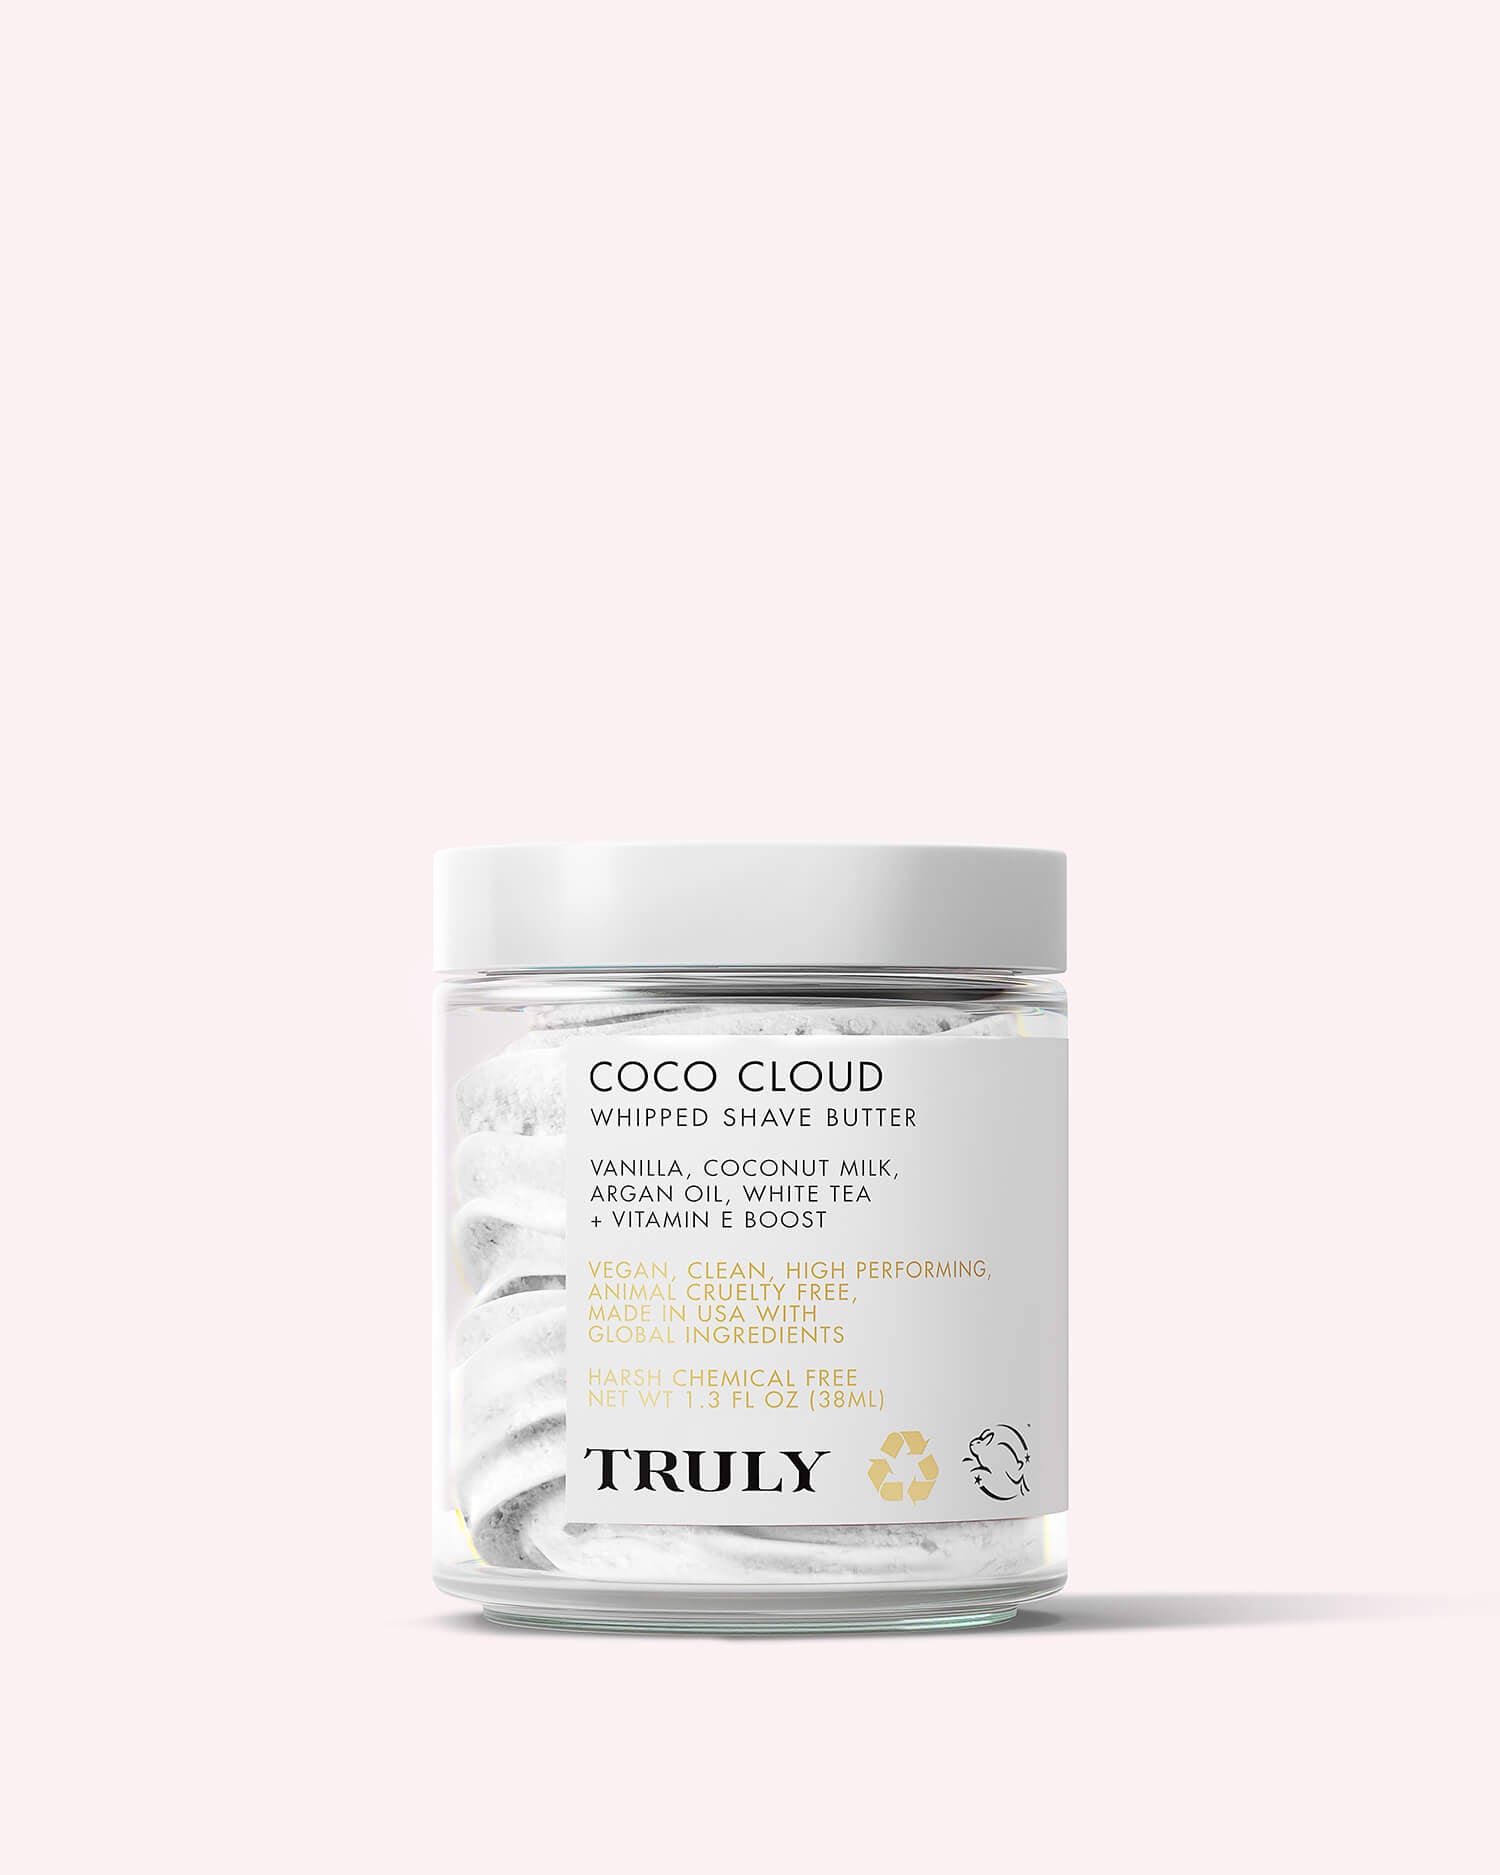 Truly Coco Cloud Whipped Shave Butter - 1.3 oz